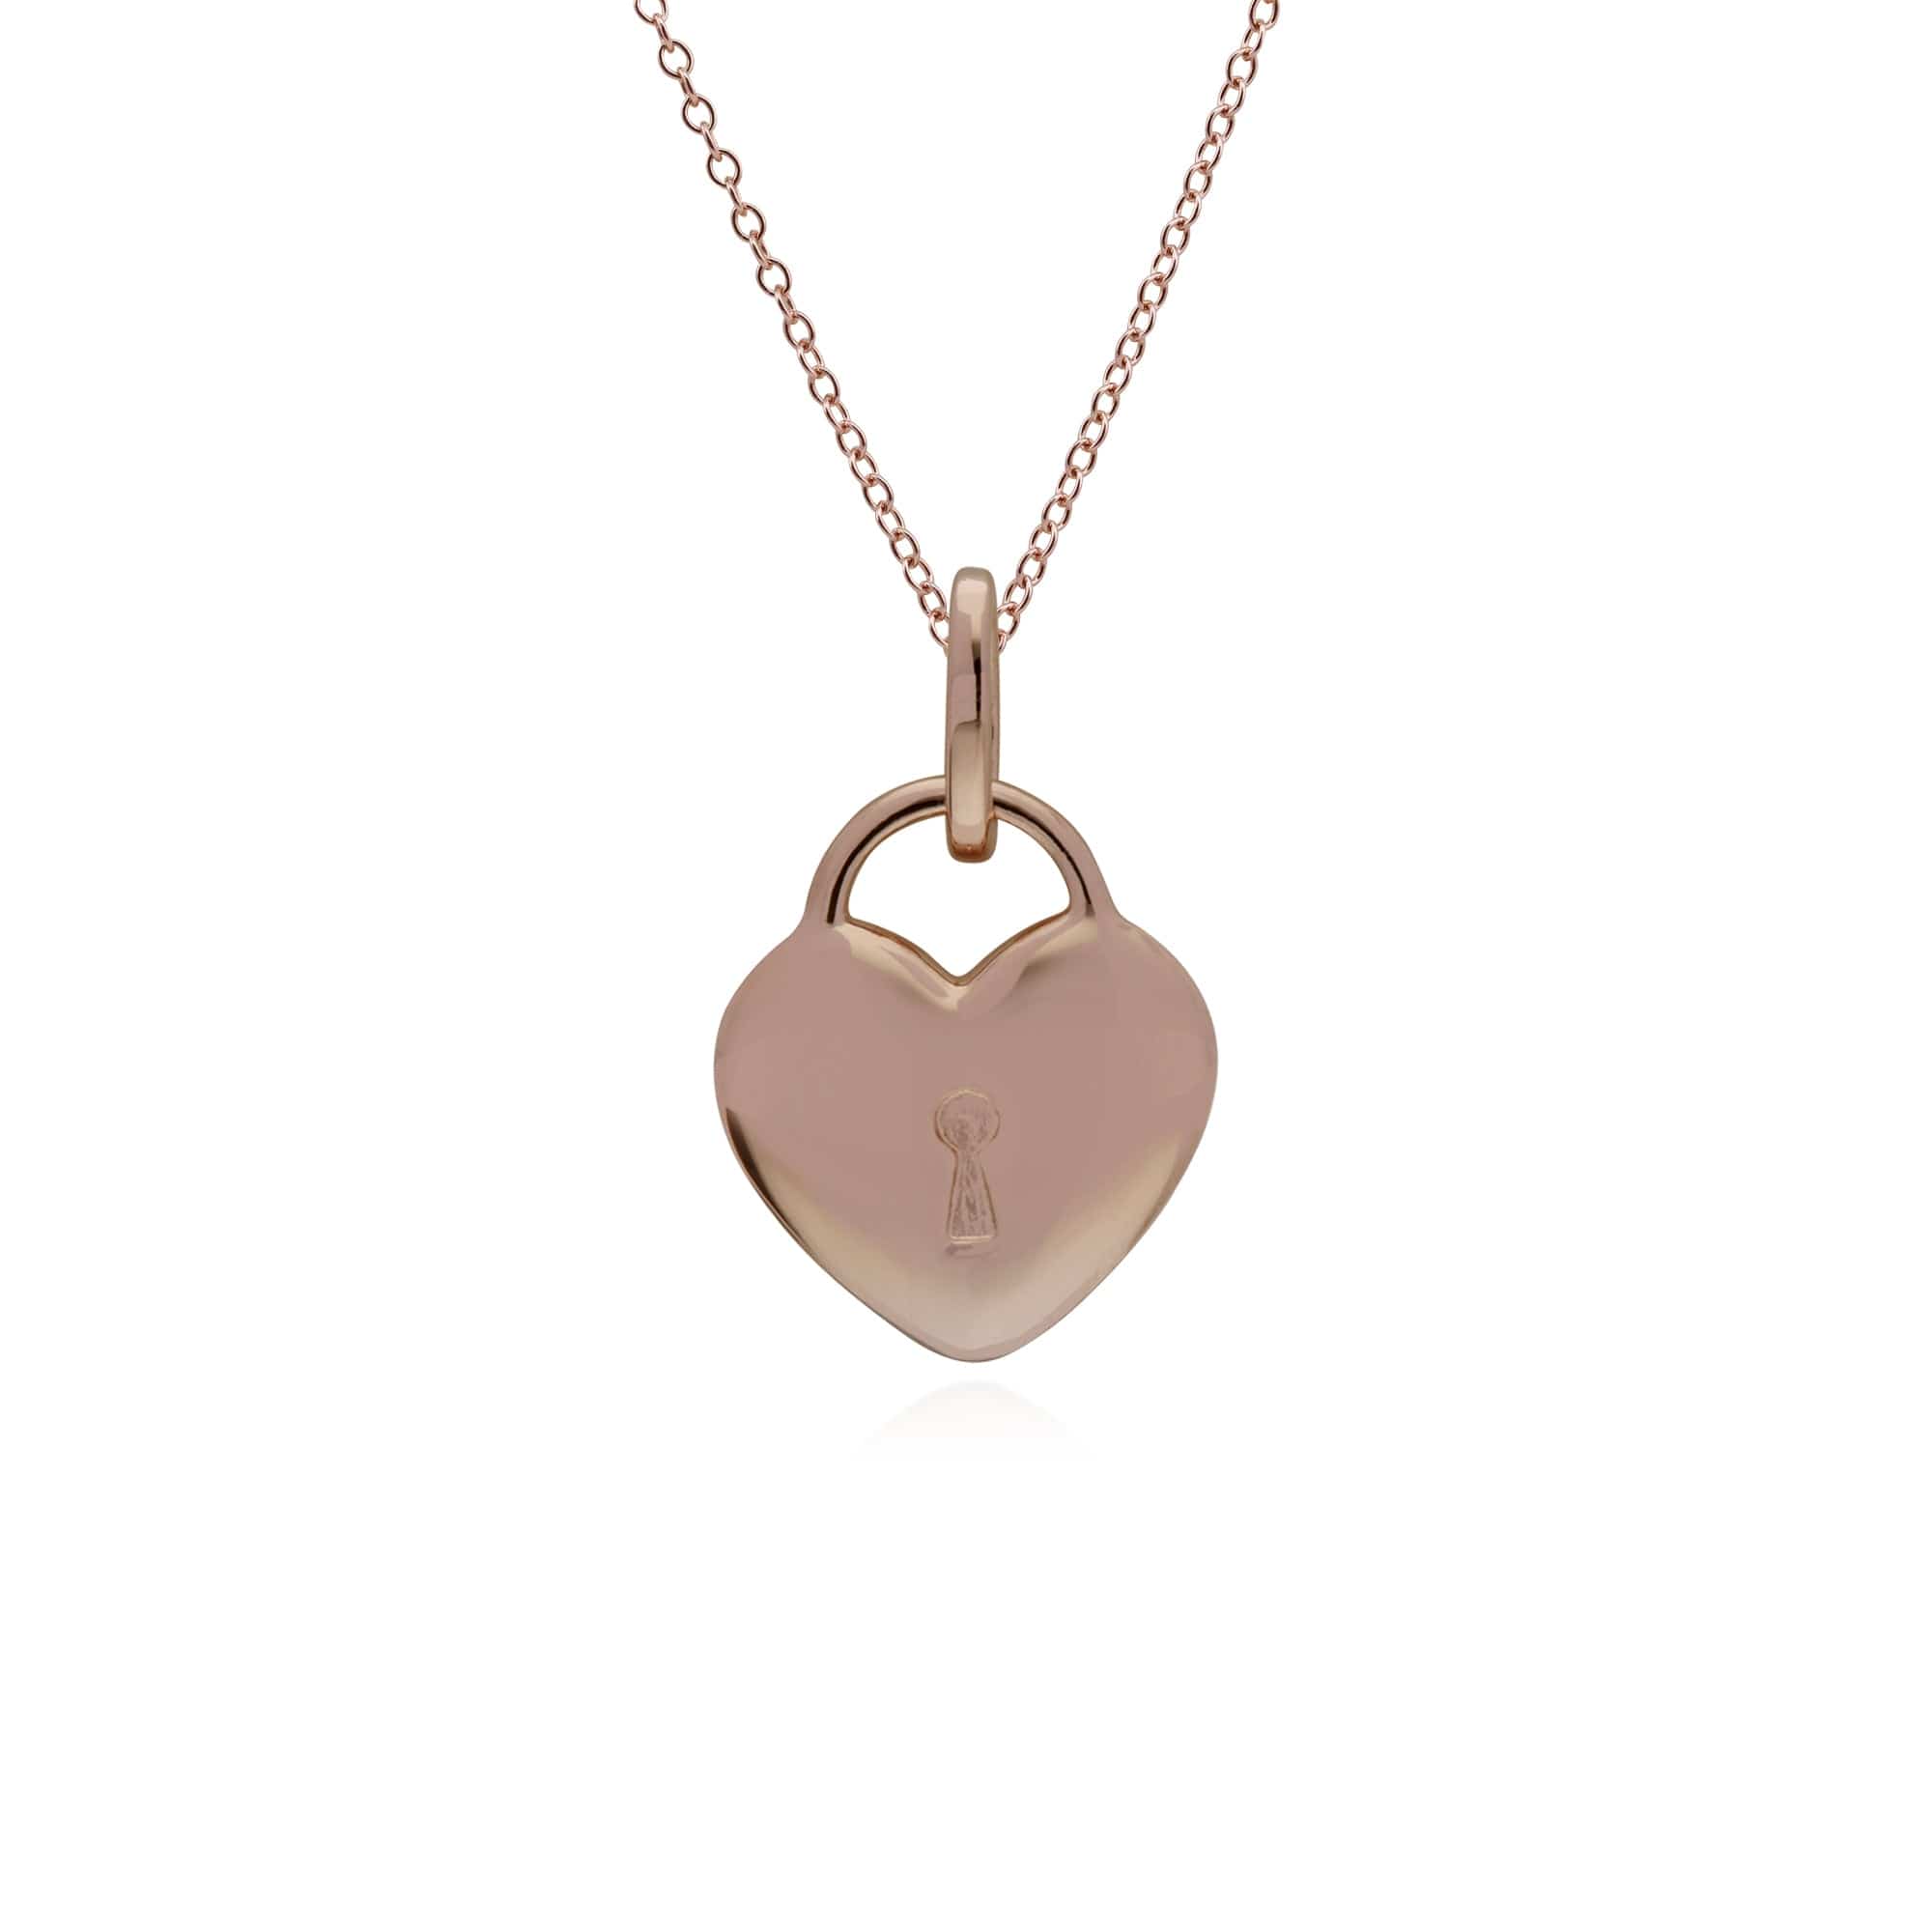 270P025902925-270P026901925 Classic Plain Heart Lock Pendant & Rainbow Moonstone Charm in Rose Gold Plated 925 Sterling Silver 3